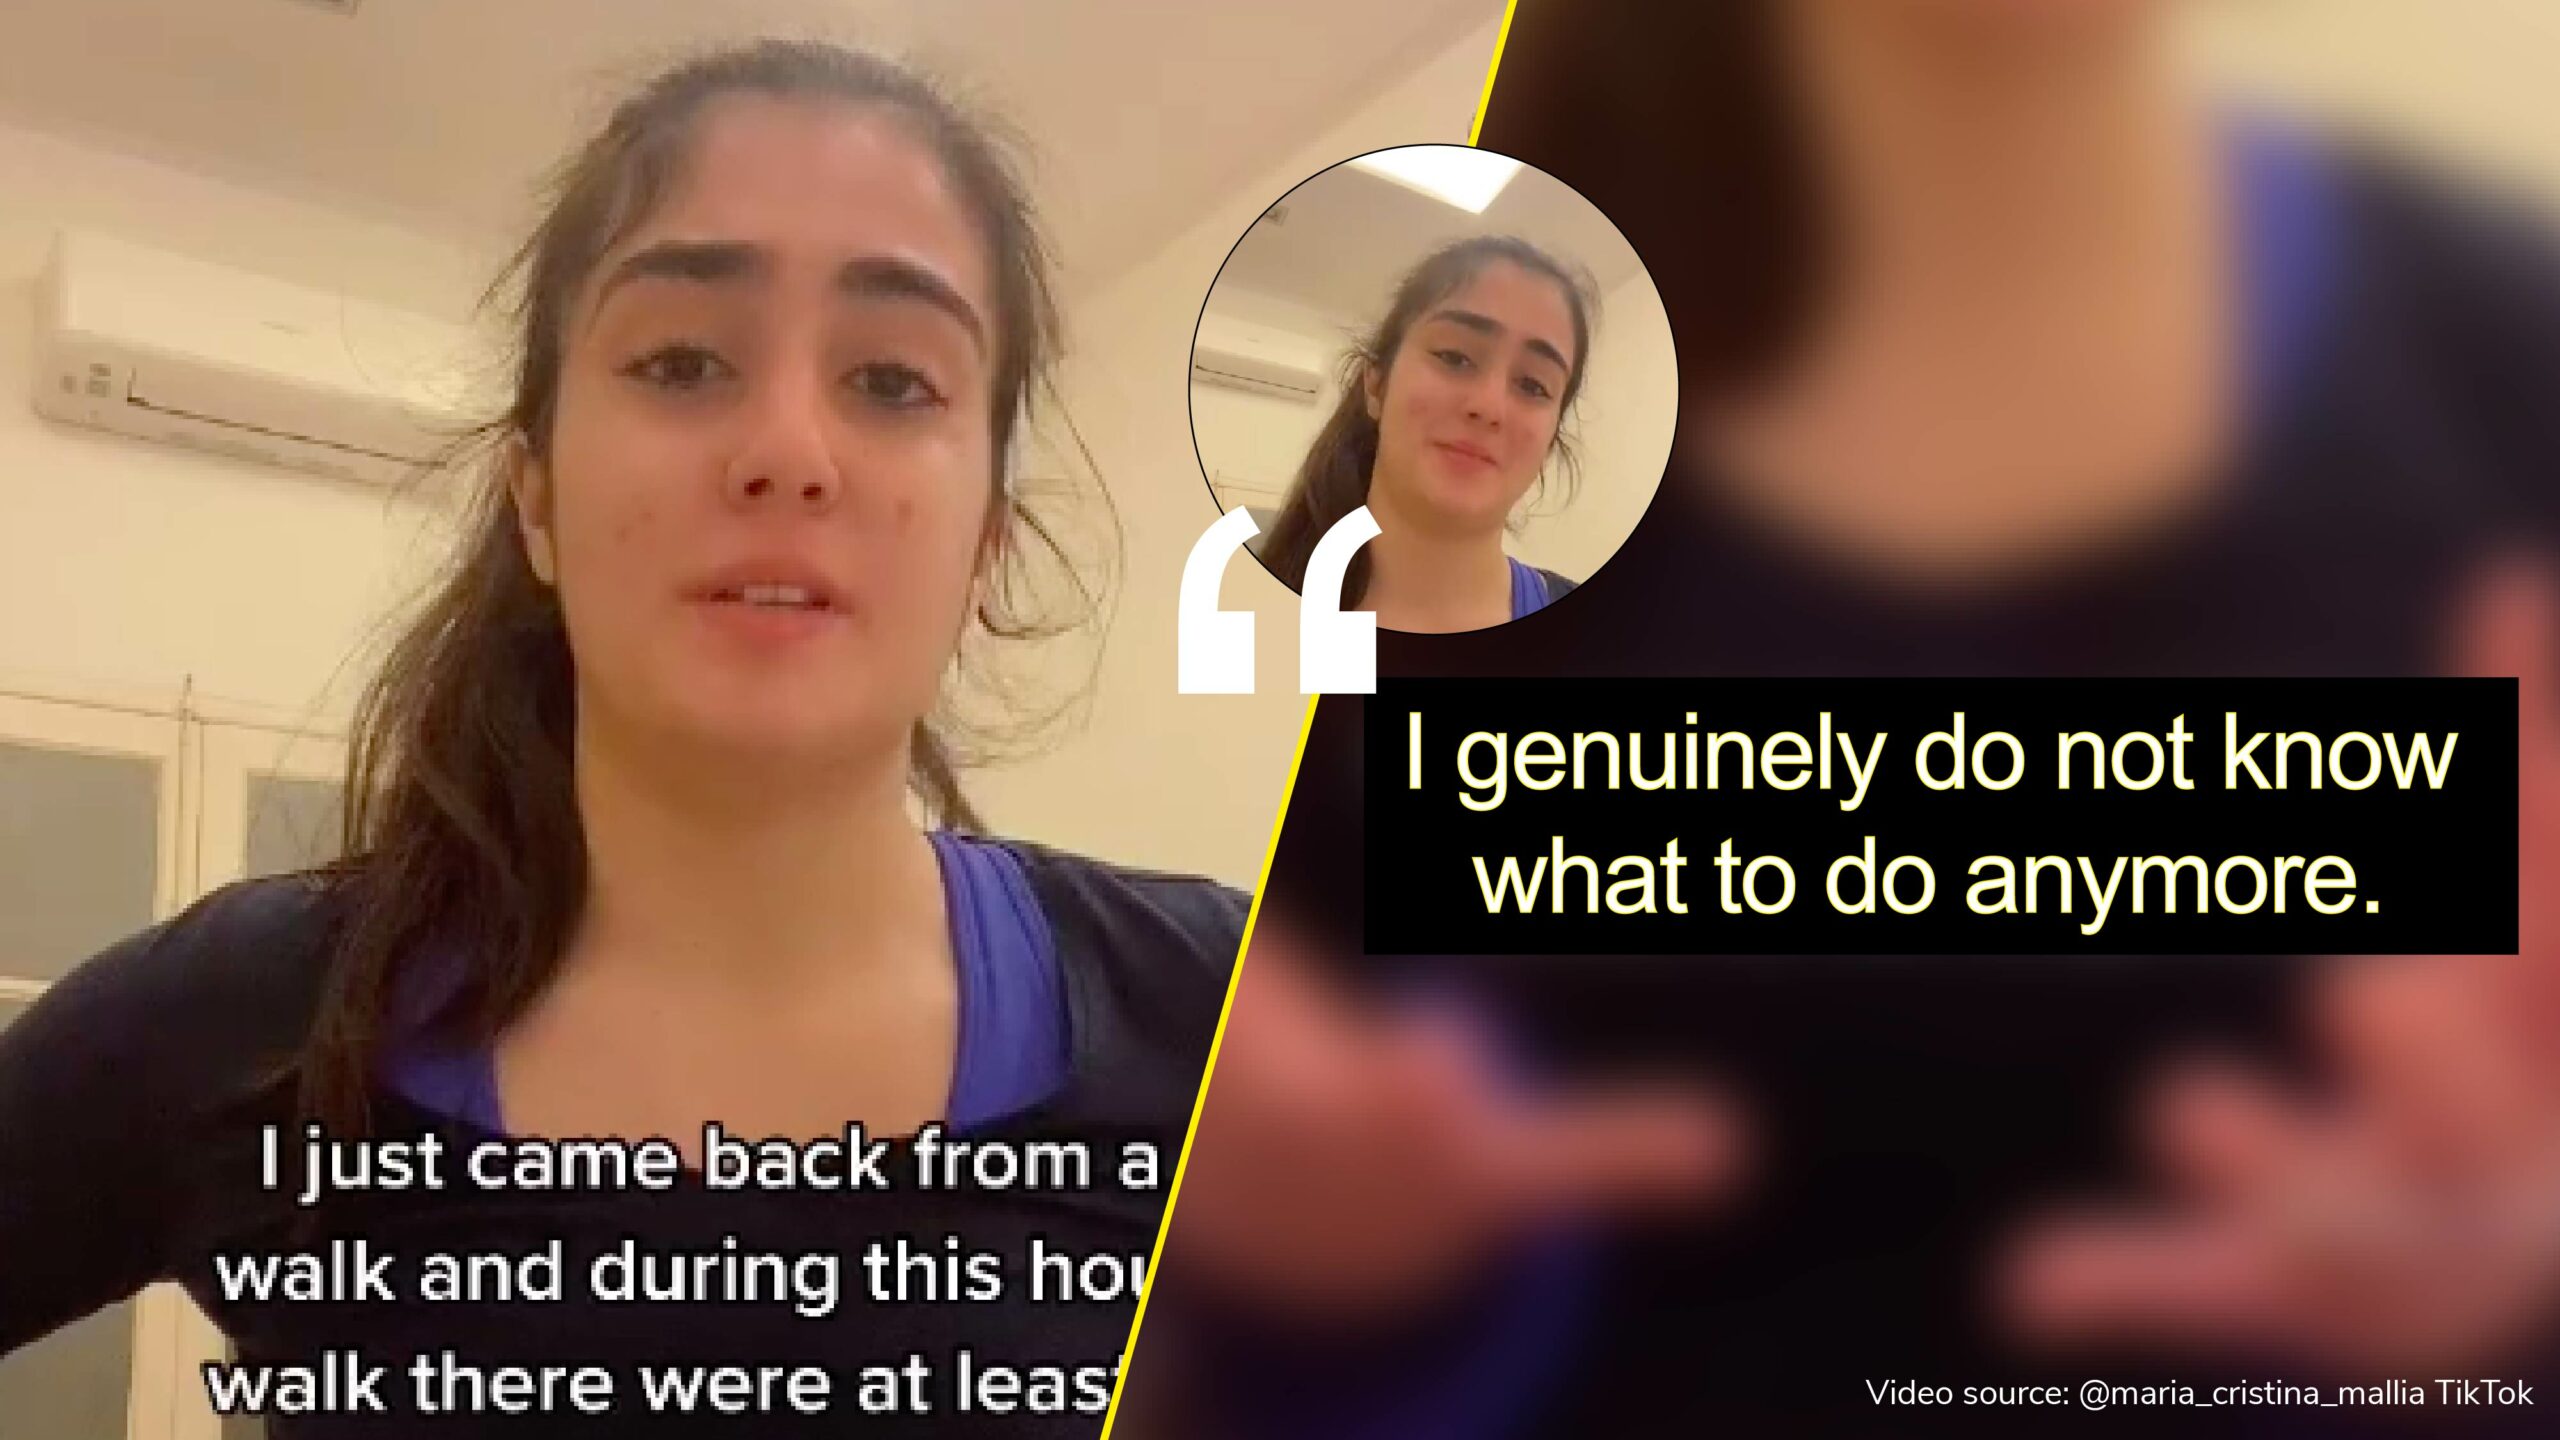 Maltese youth breaks down on TikTok after catcalling experience